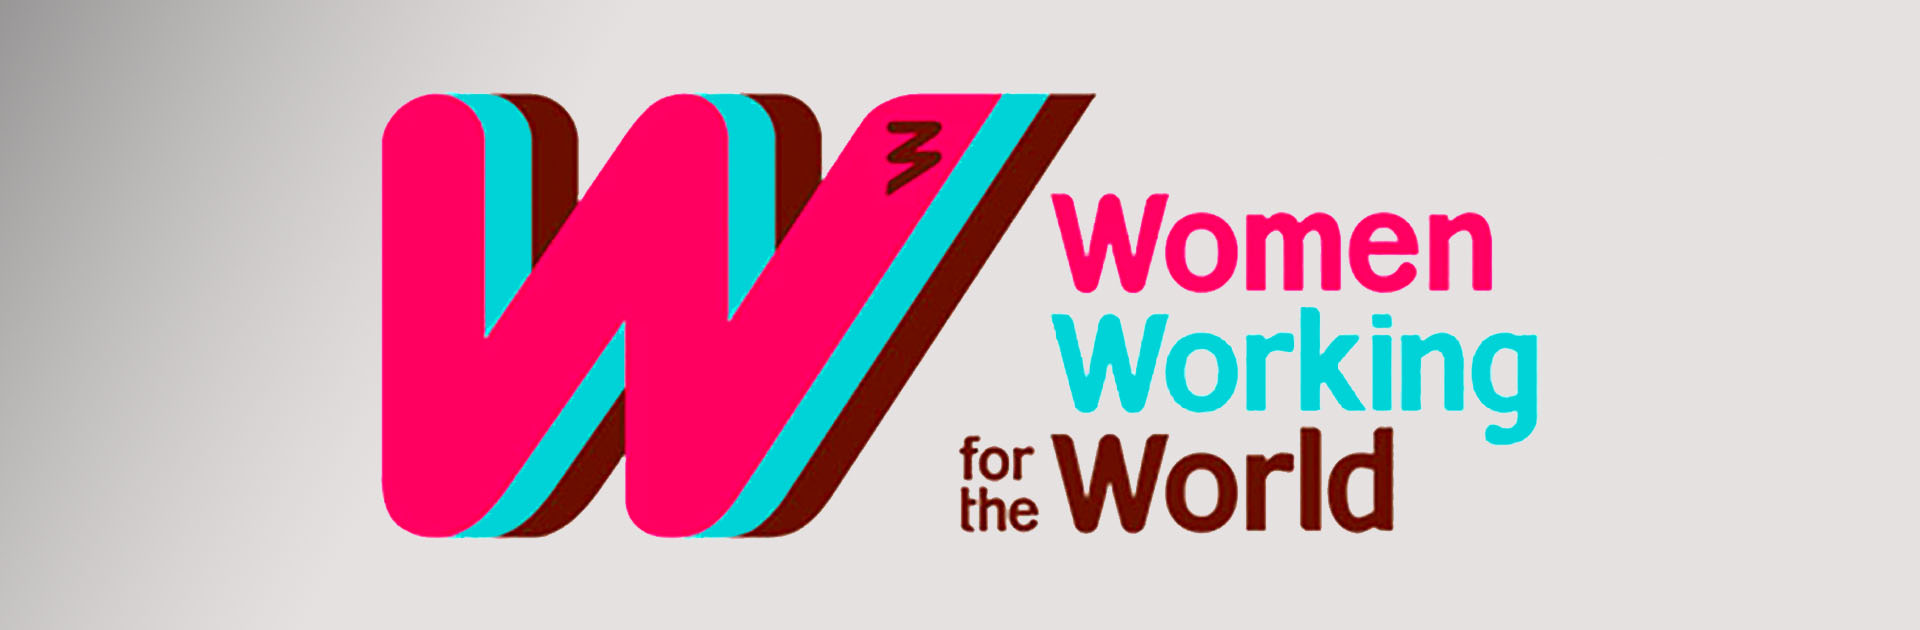 Women Working for the World Conference